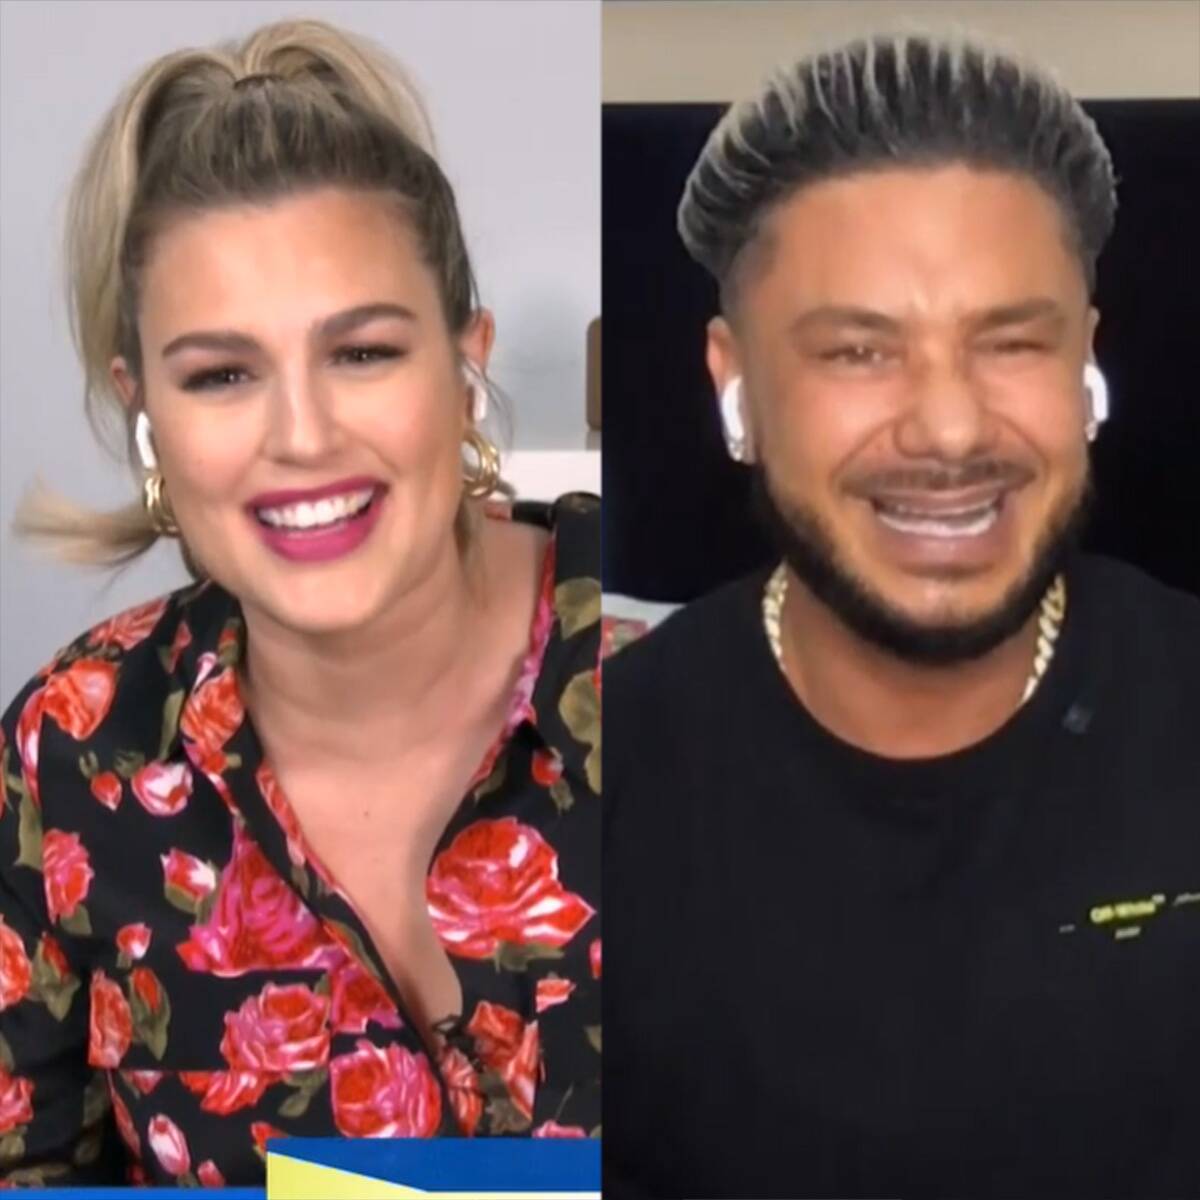 See Pauly D Pull an Epic Prank on E!'s Carissa Culiner for April Fools' Day